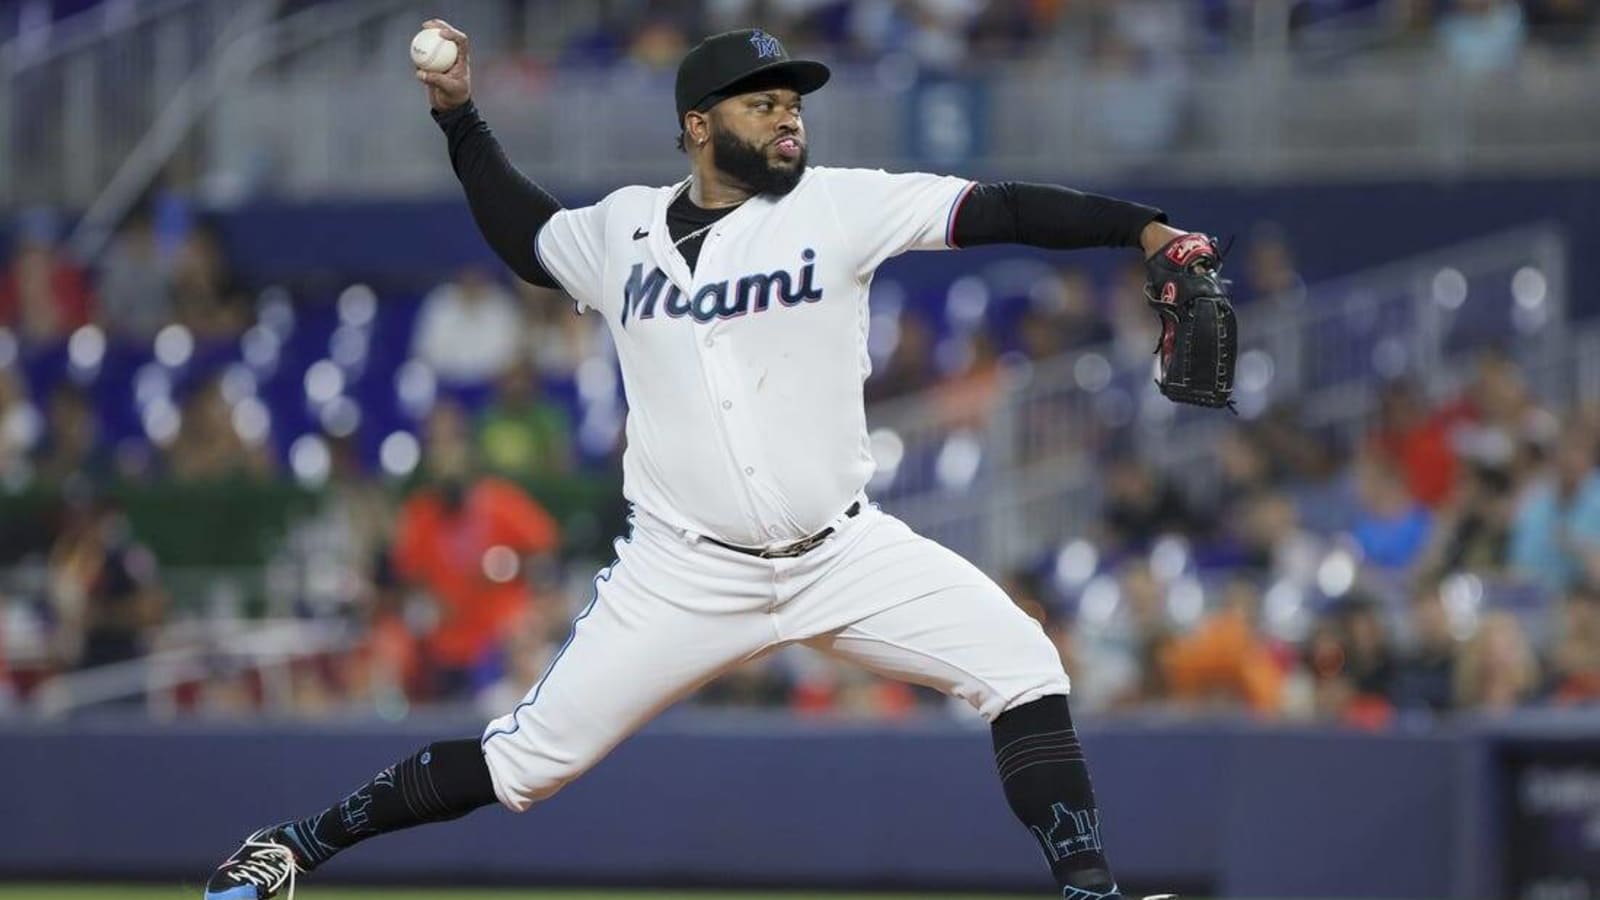 Marlins place RHP Johnny Cueto (illness) on 15-day IL